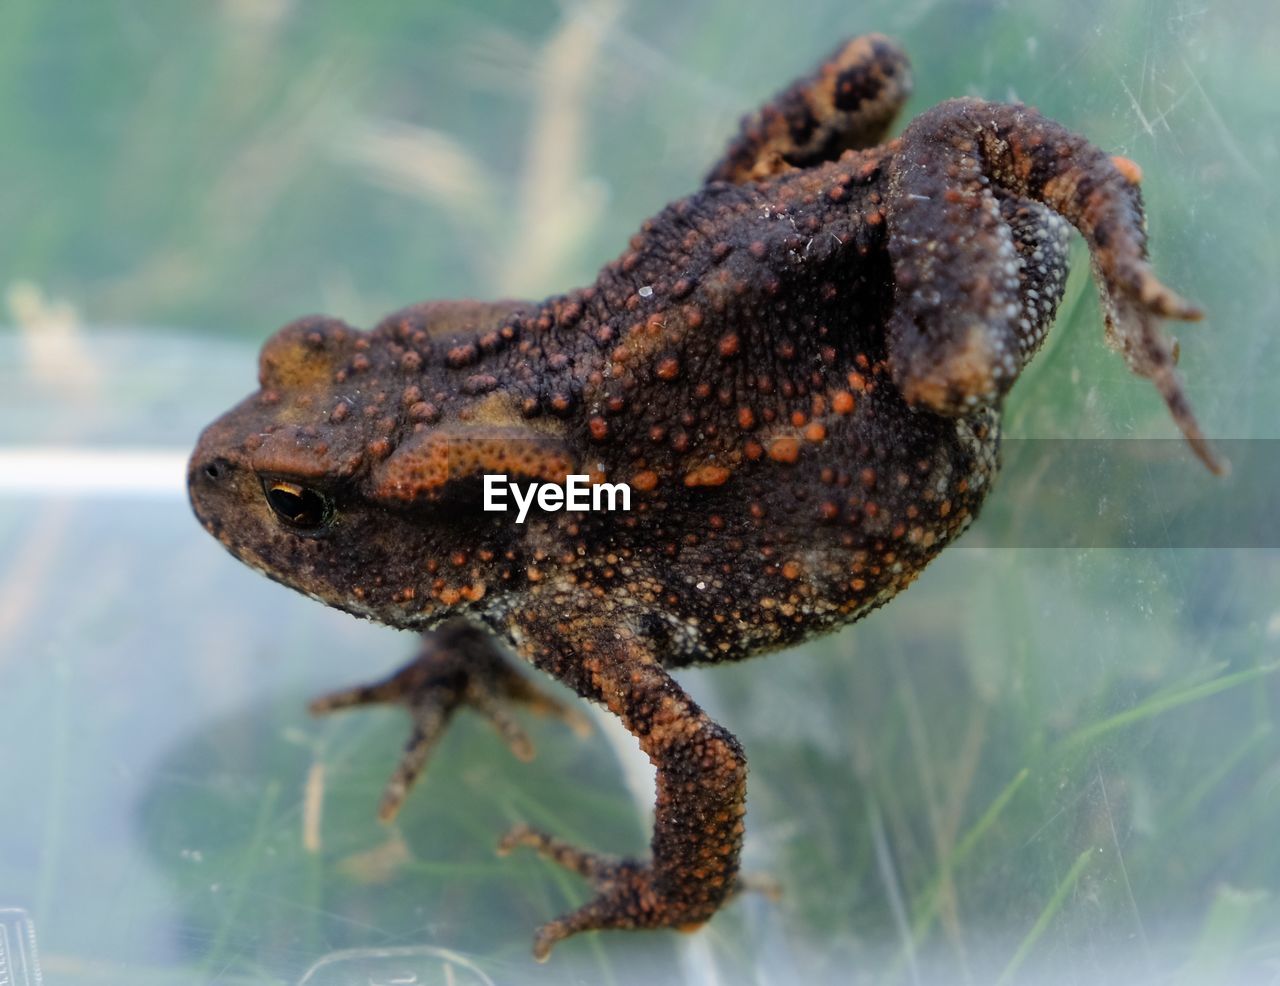 Young common toad